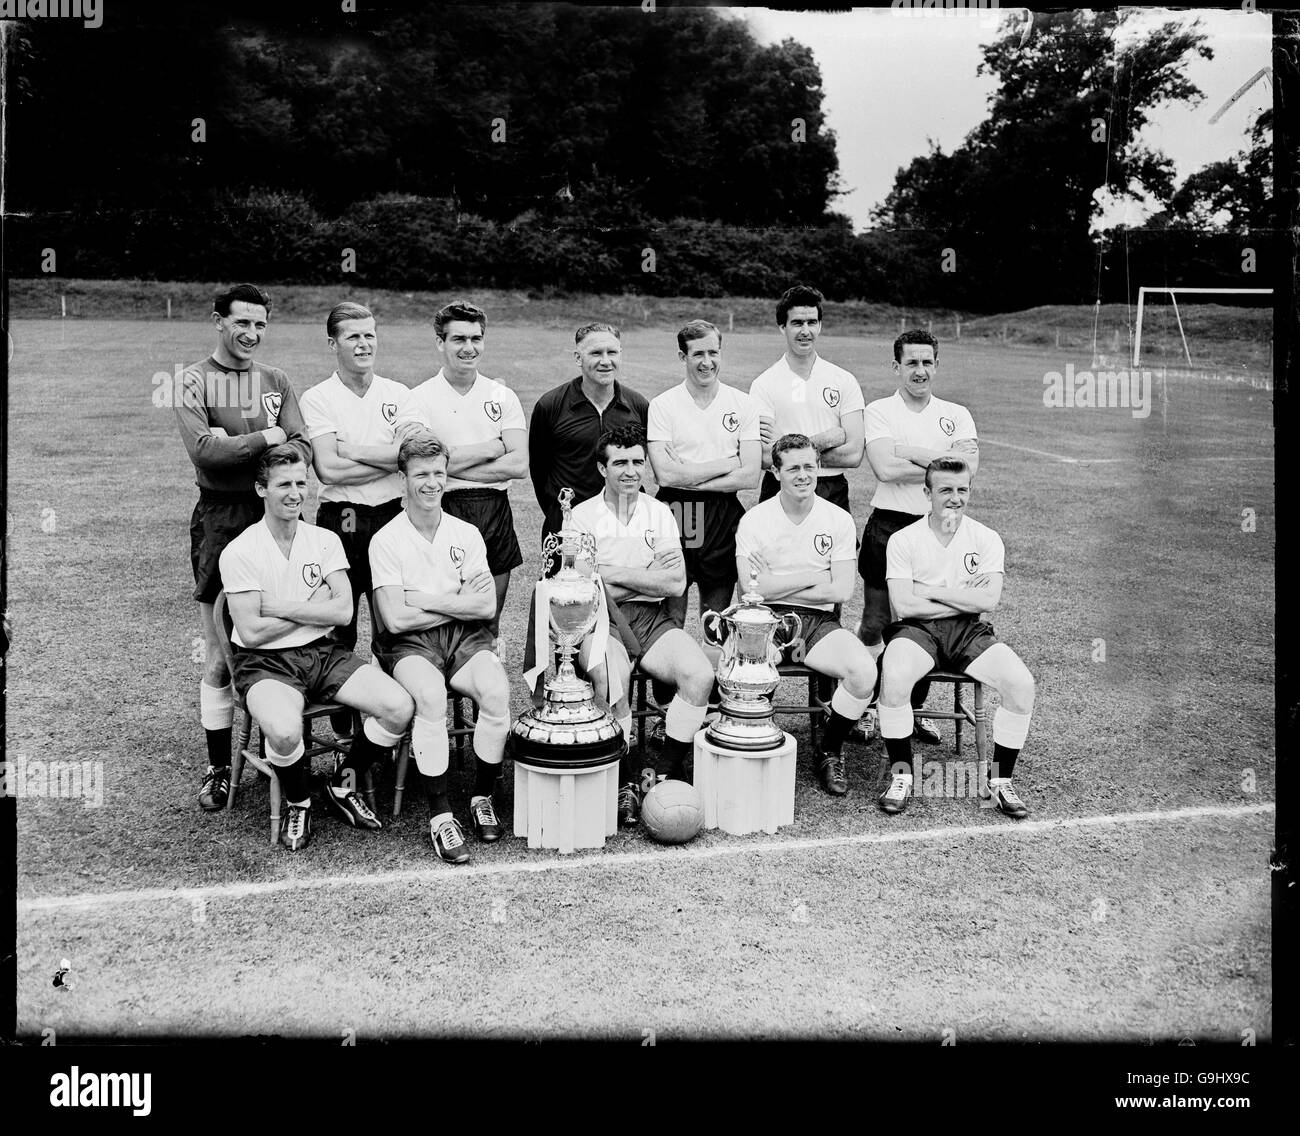 Tottenham Hotspur team group: (back row, l-r) Bill Brown, Peter Baker, Ron Henry, manager Bill Nicholson, Danny Blanchflower, Maurice Norman, Dave Mackay (front row, l-r) Cliff Jones, John White, Bobby Smith, Les Allen, Terry Dyson Stock Photo